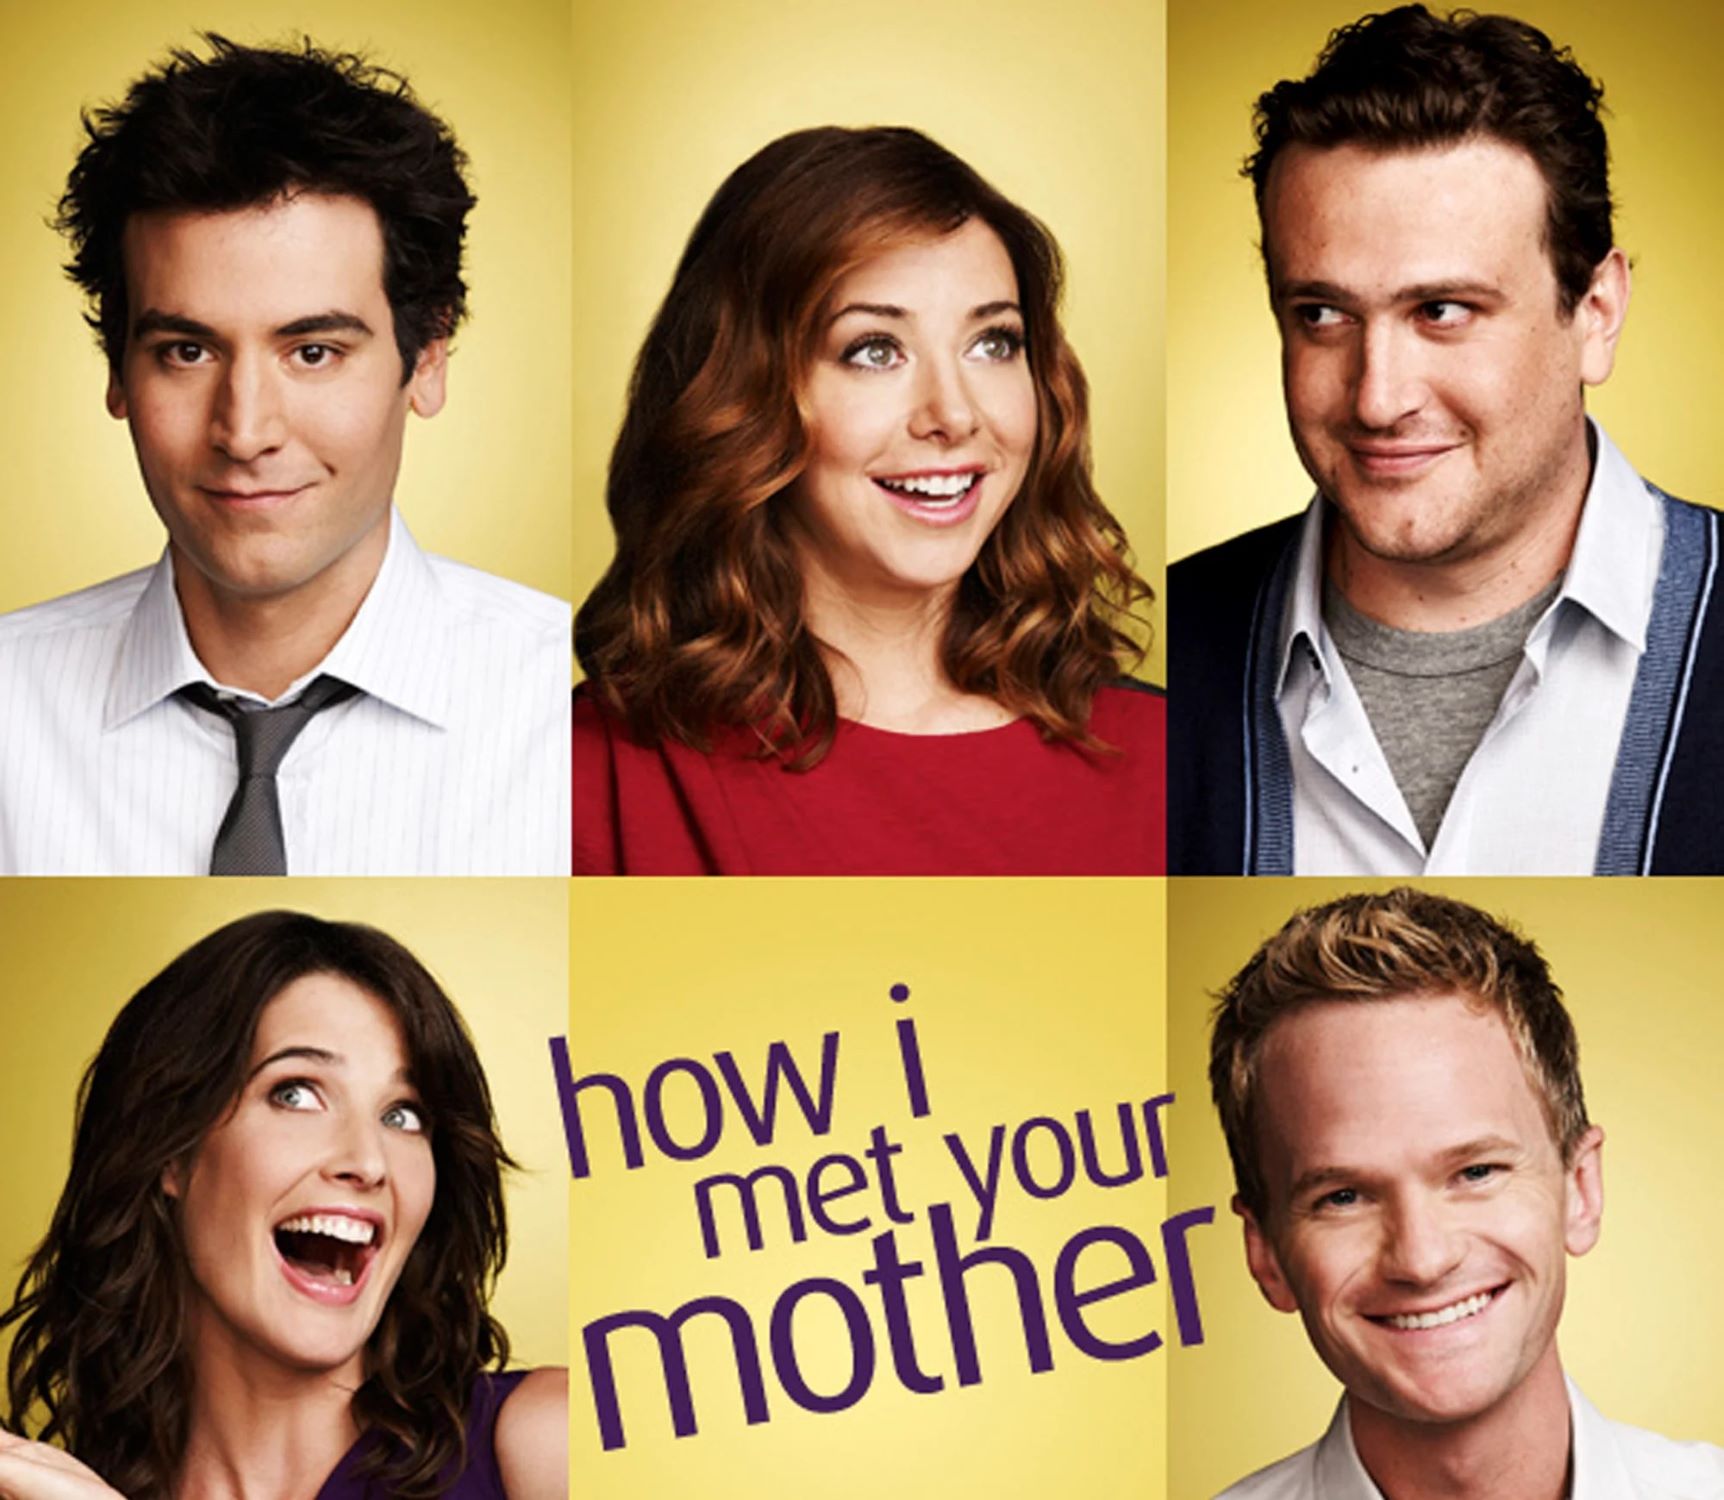 How I Met Your Mother Background Music